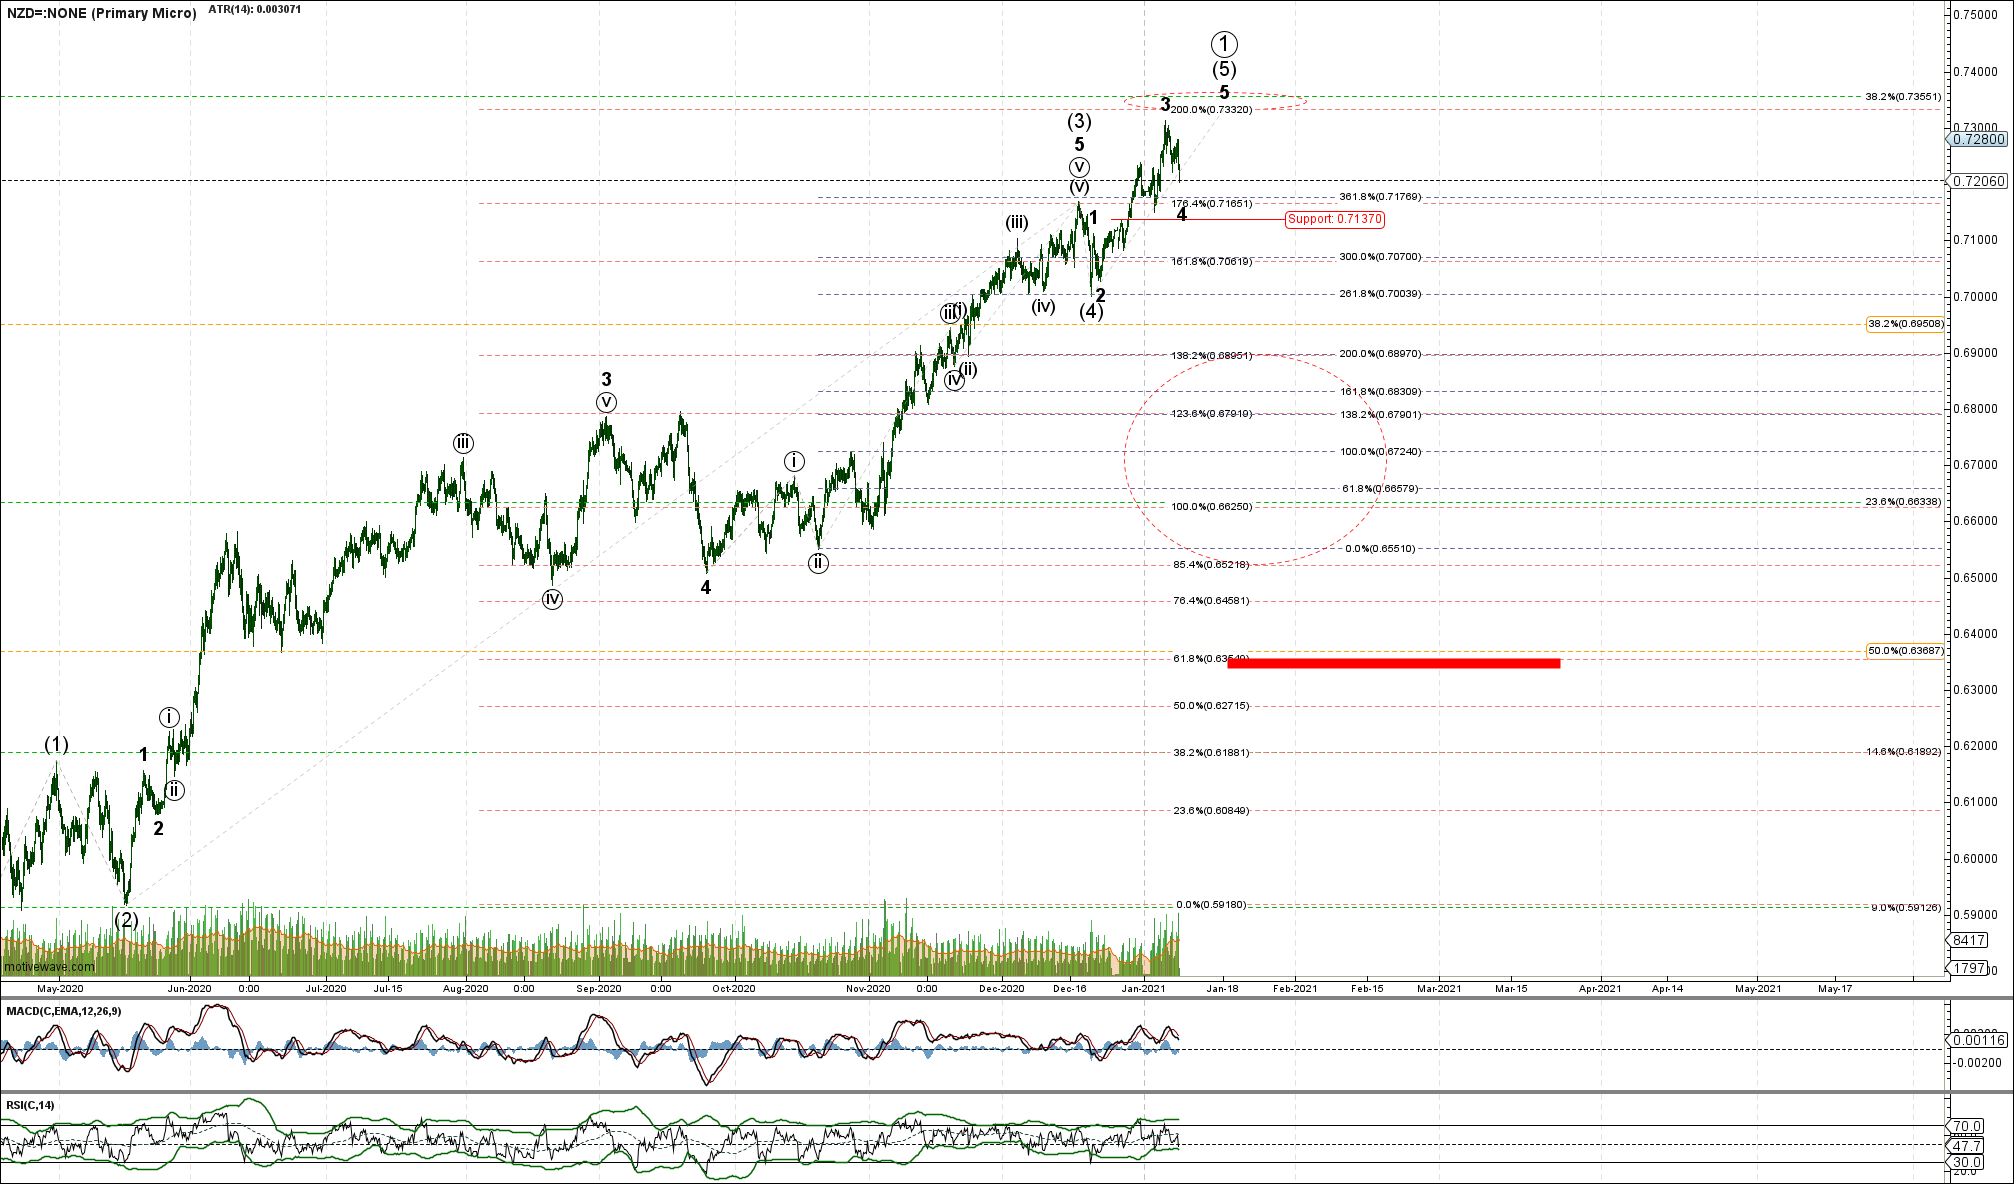 NZD= - Primary Micro - Jan-08 1348 PM (4 hour)